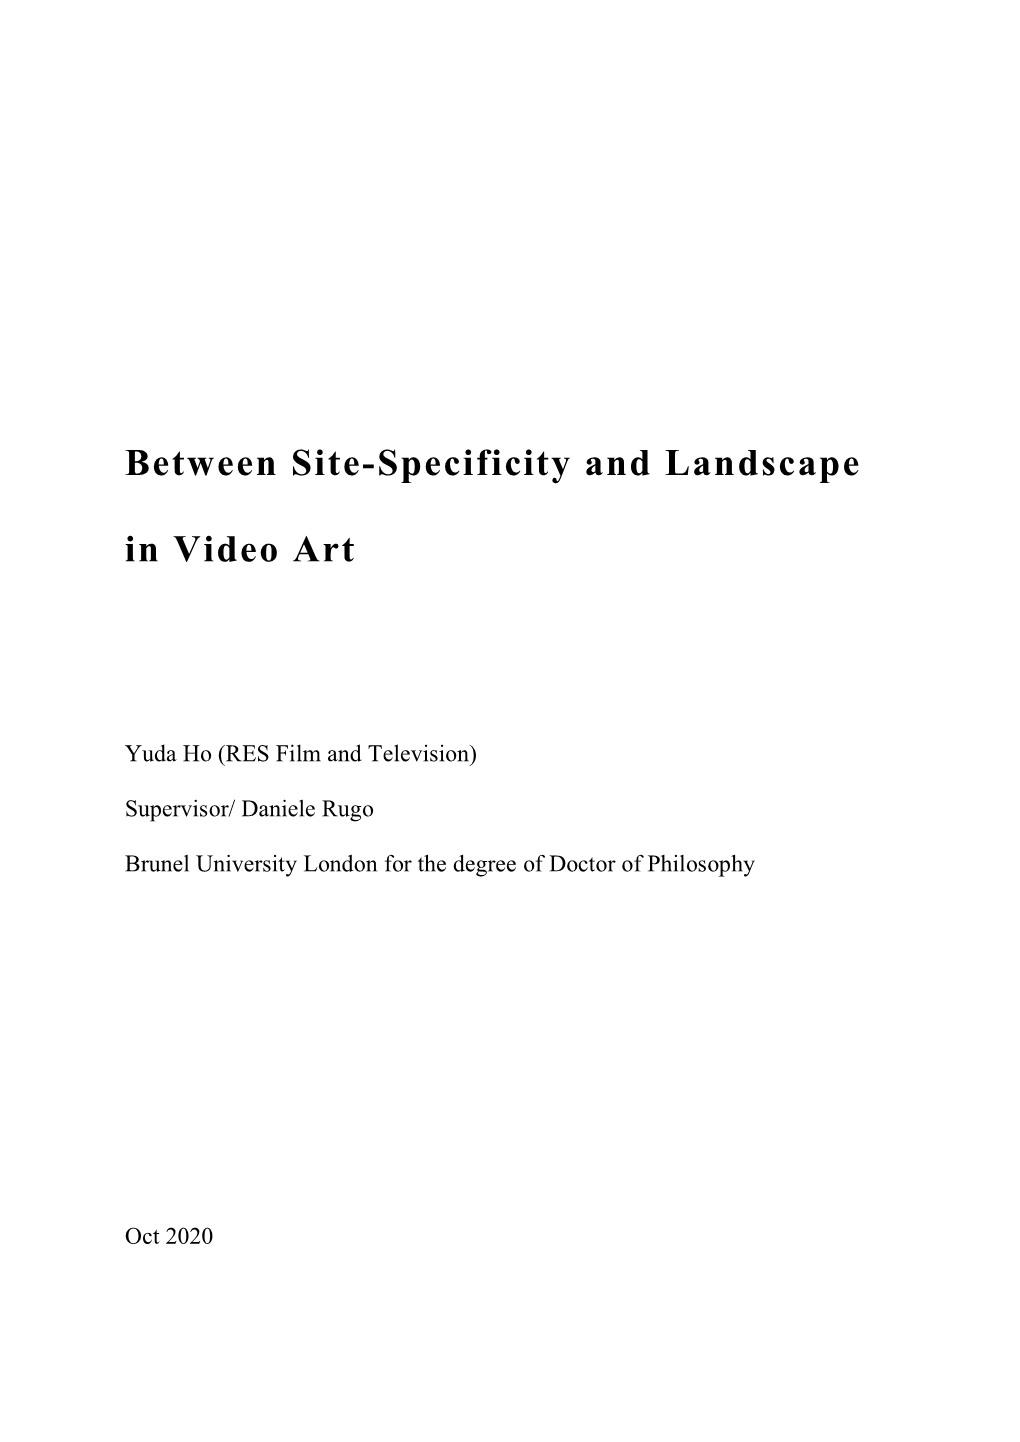 Between Site-Specificity and Landscape in Video Art